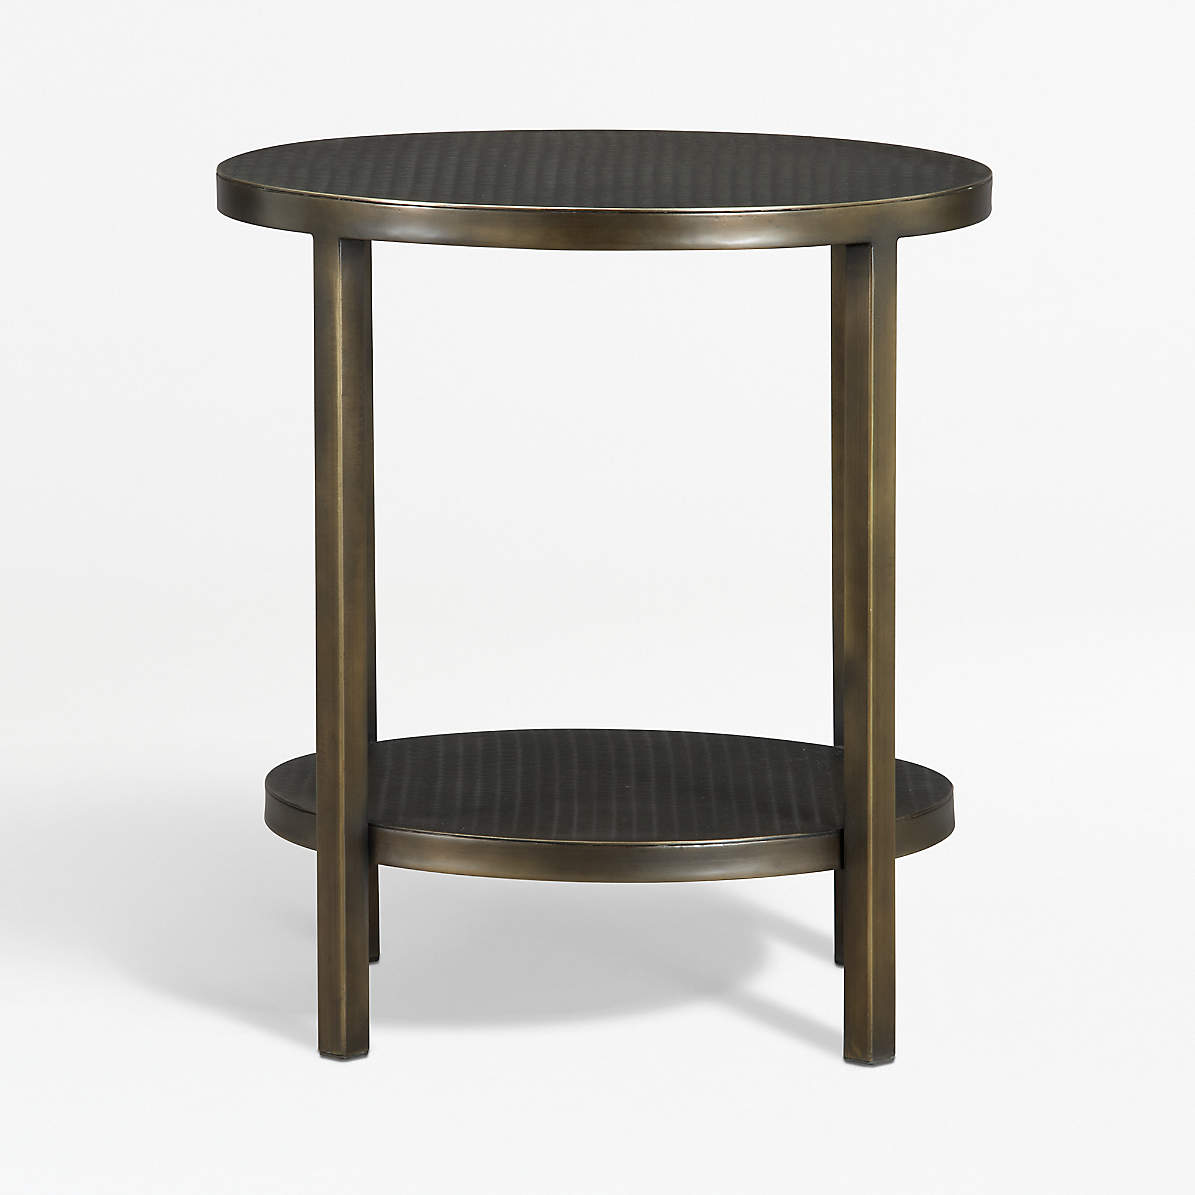 Echelon Round Side Table Reviews, Round Side Table Skirt